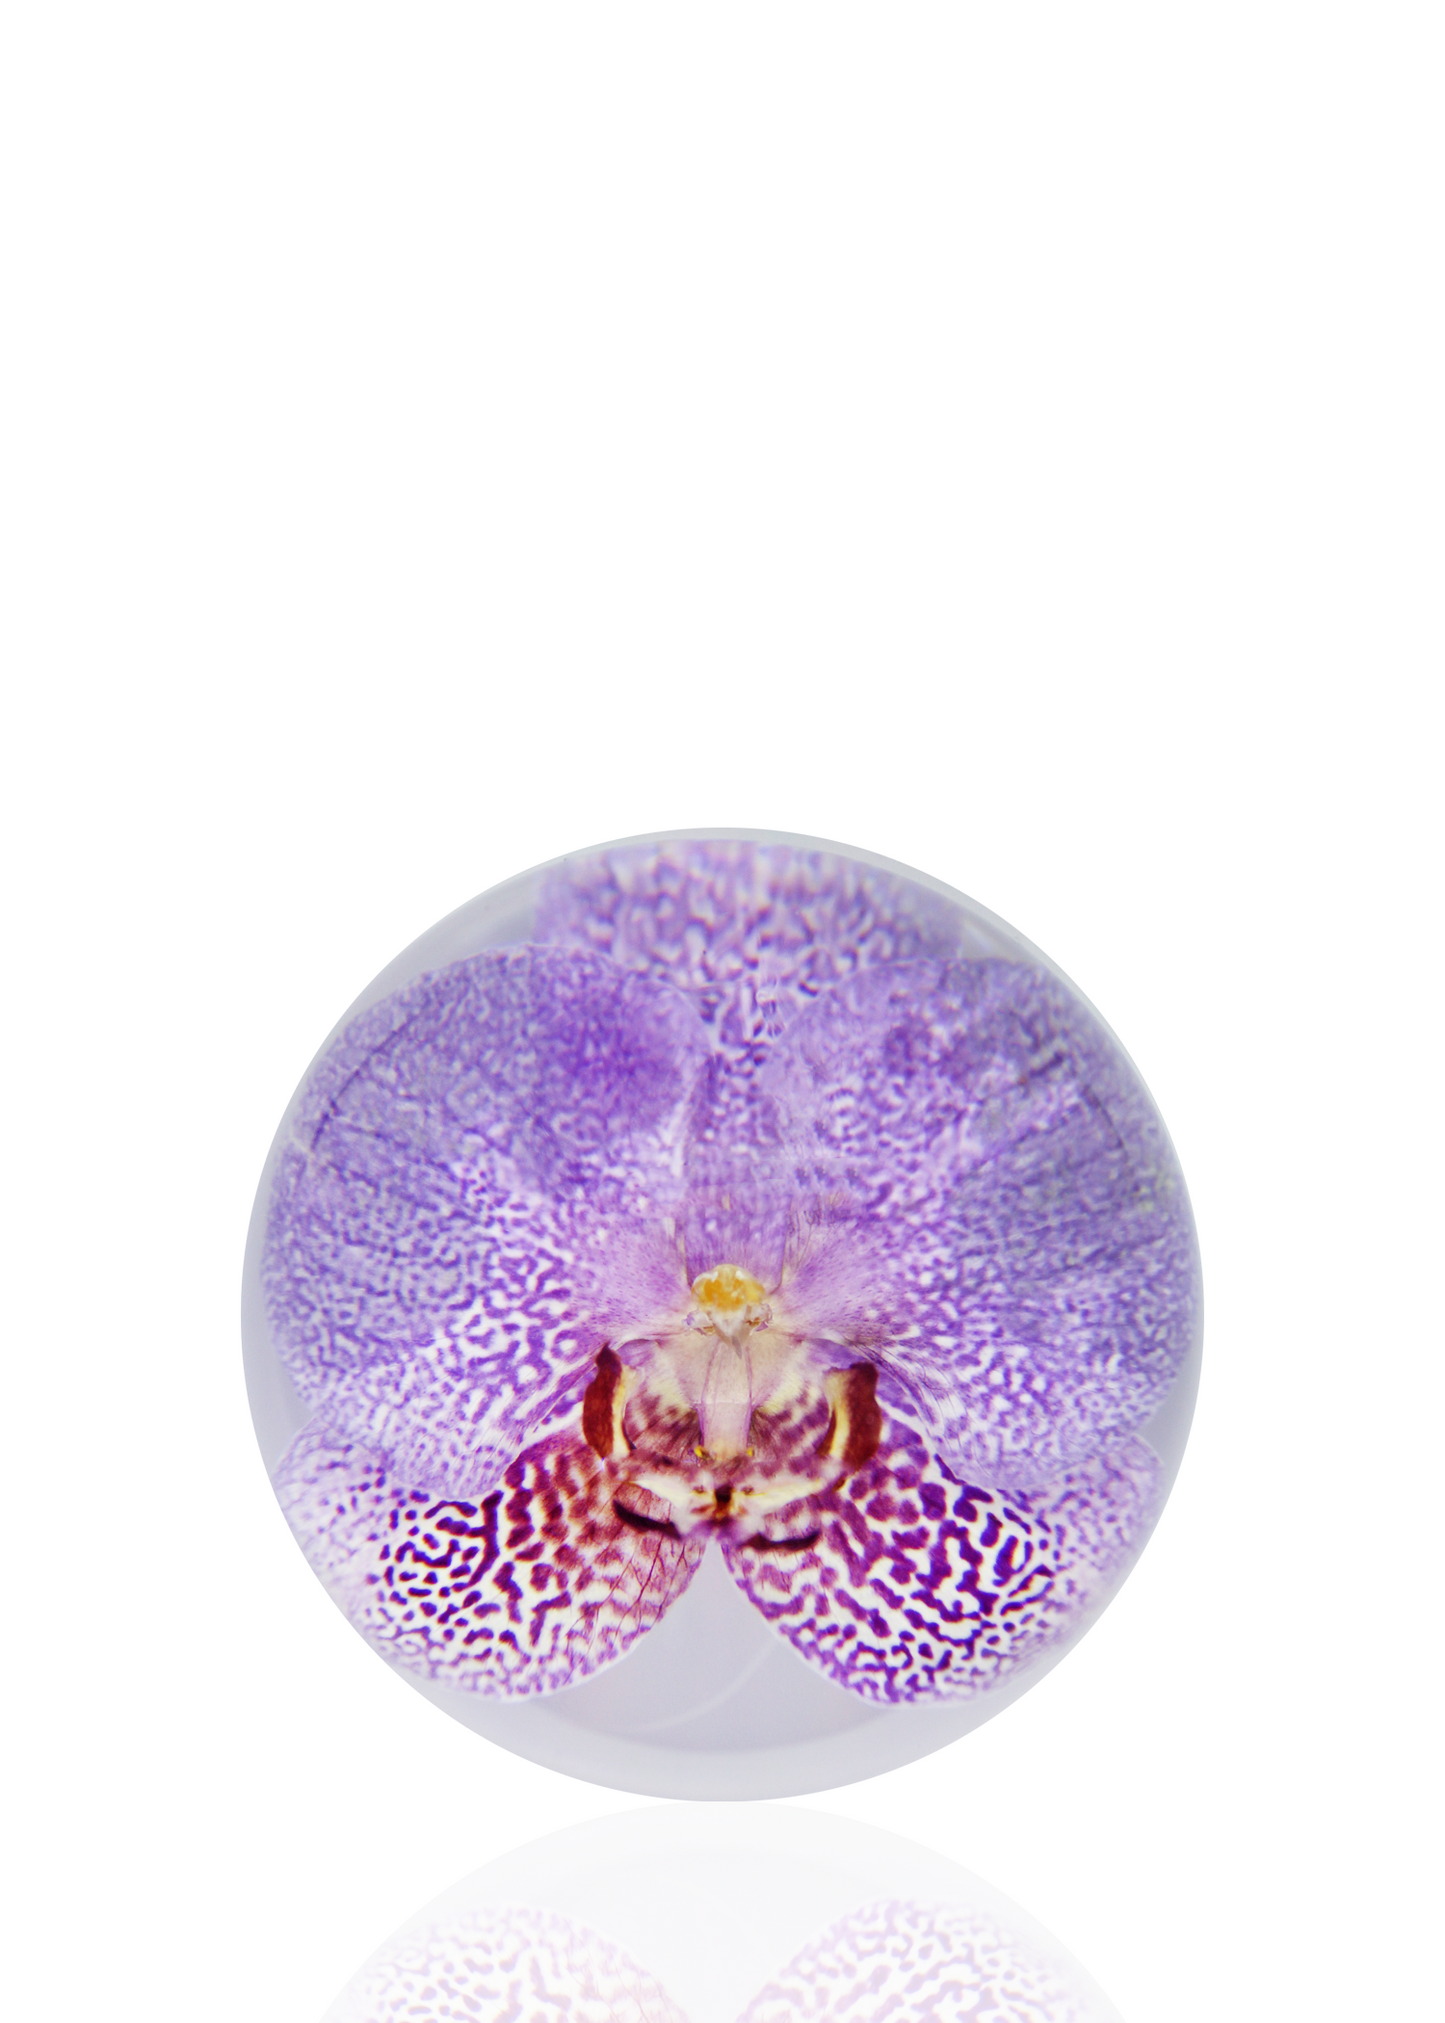 Crystal ball encapsulating a full preserved purple orchid